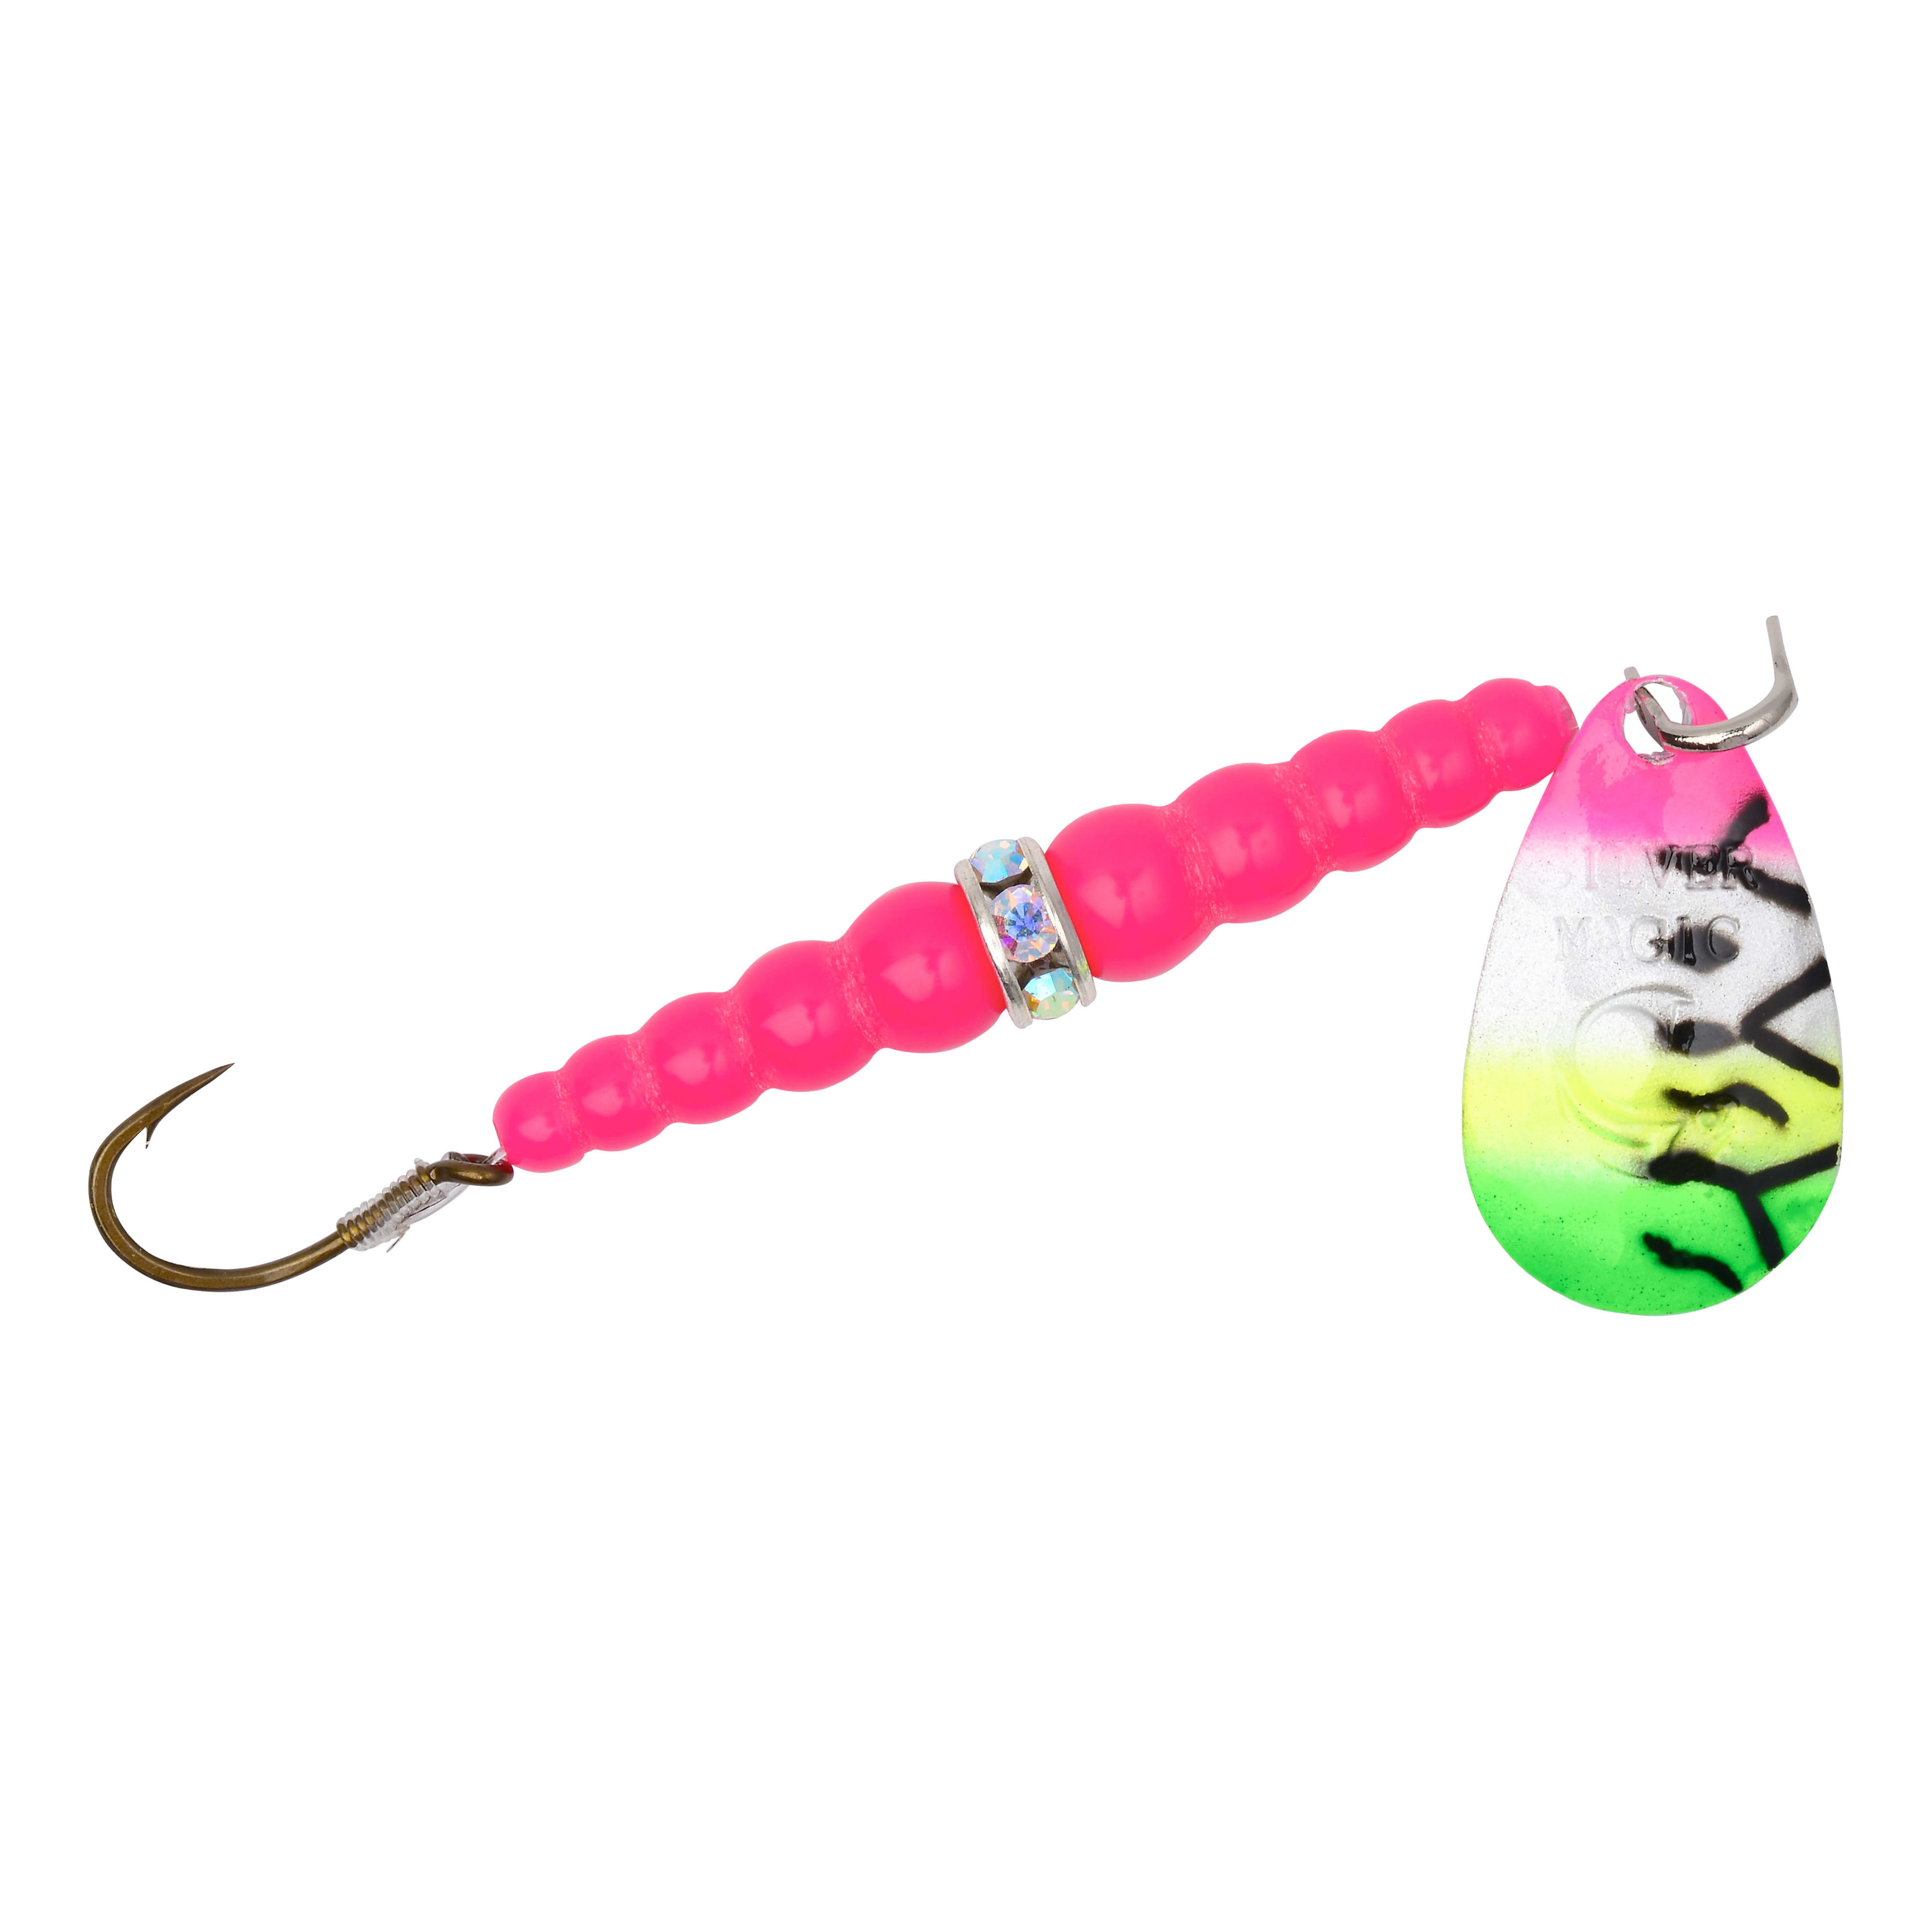 Wordens Silver Magic Spinner Lure, #6